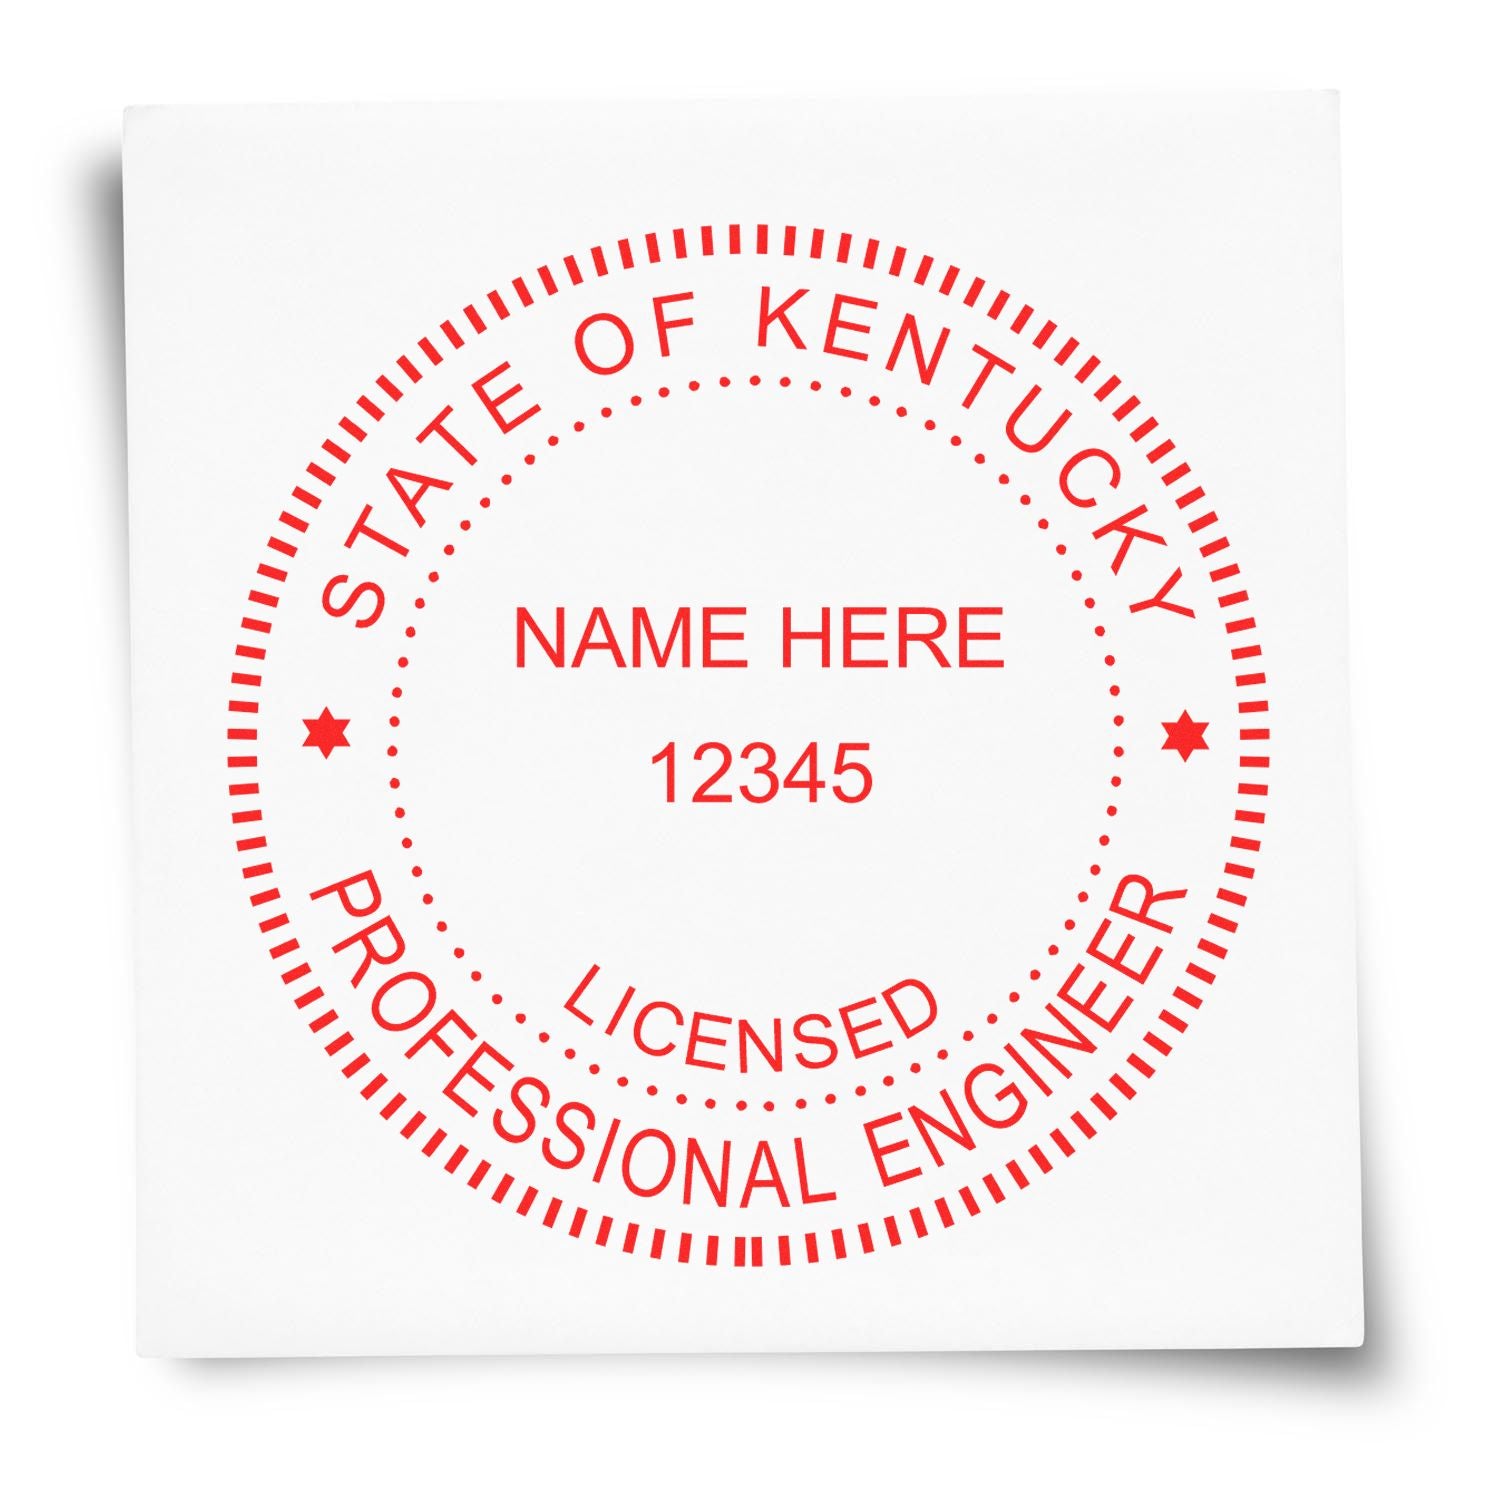 Maximize Your Engineering Credentials: Kentucky PE Stamp Renewal Feature Image